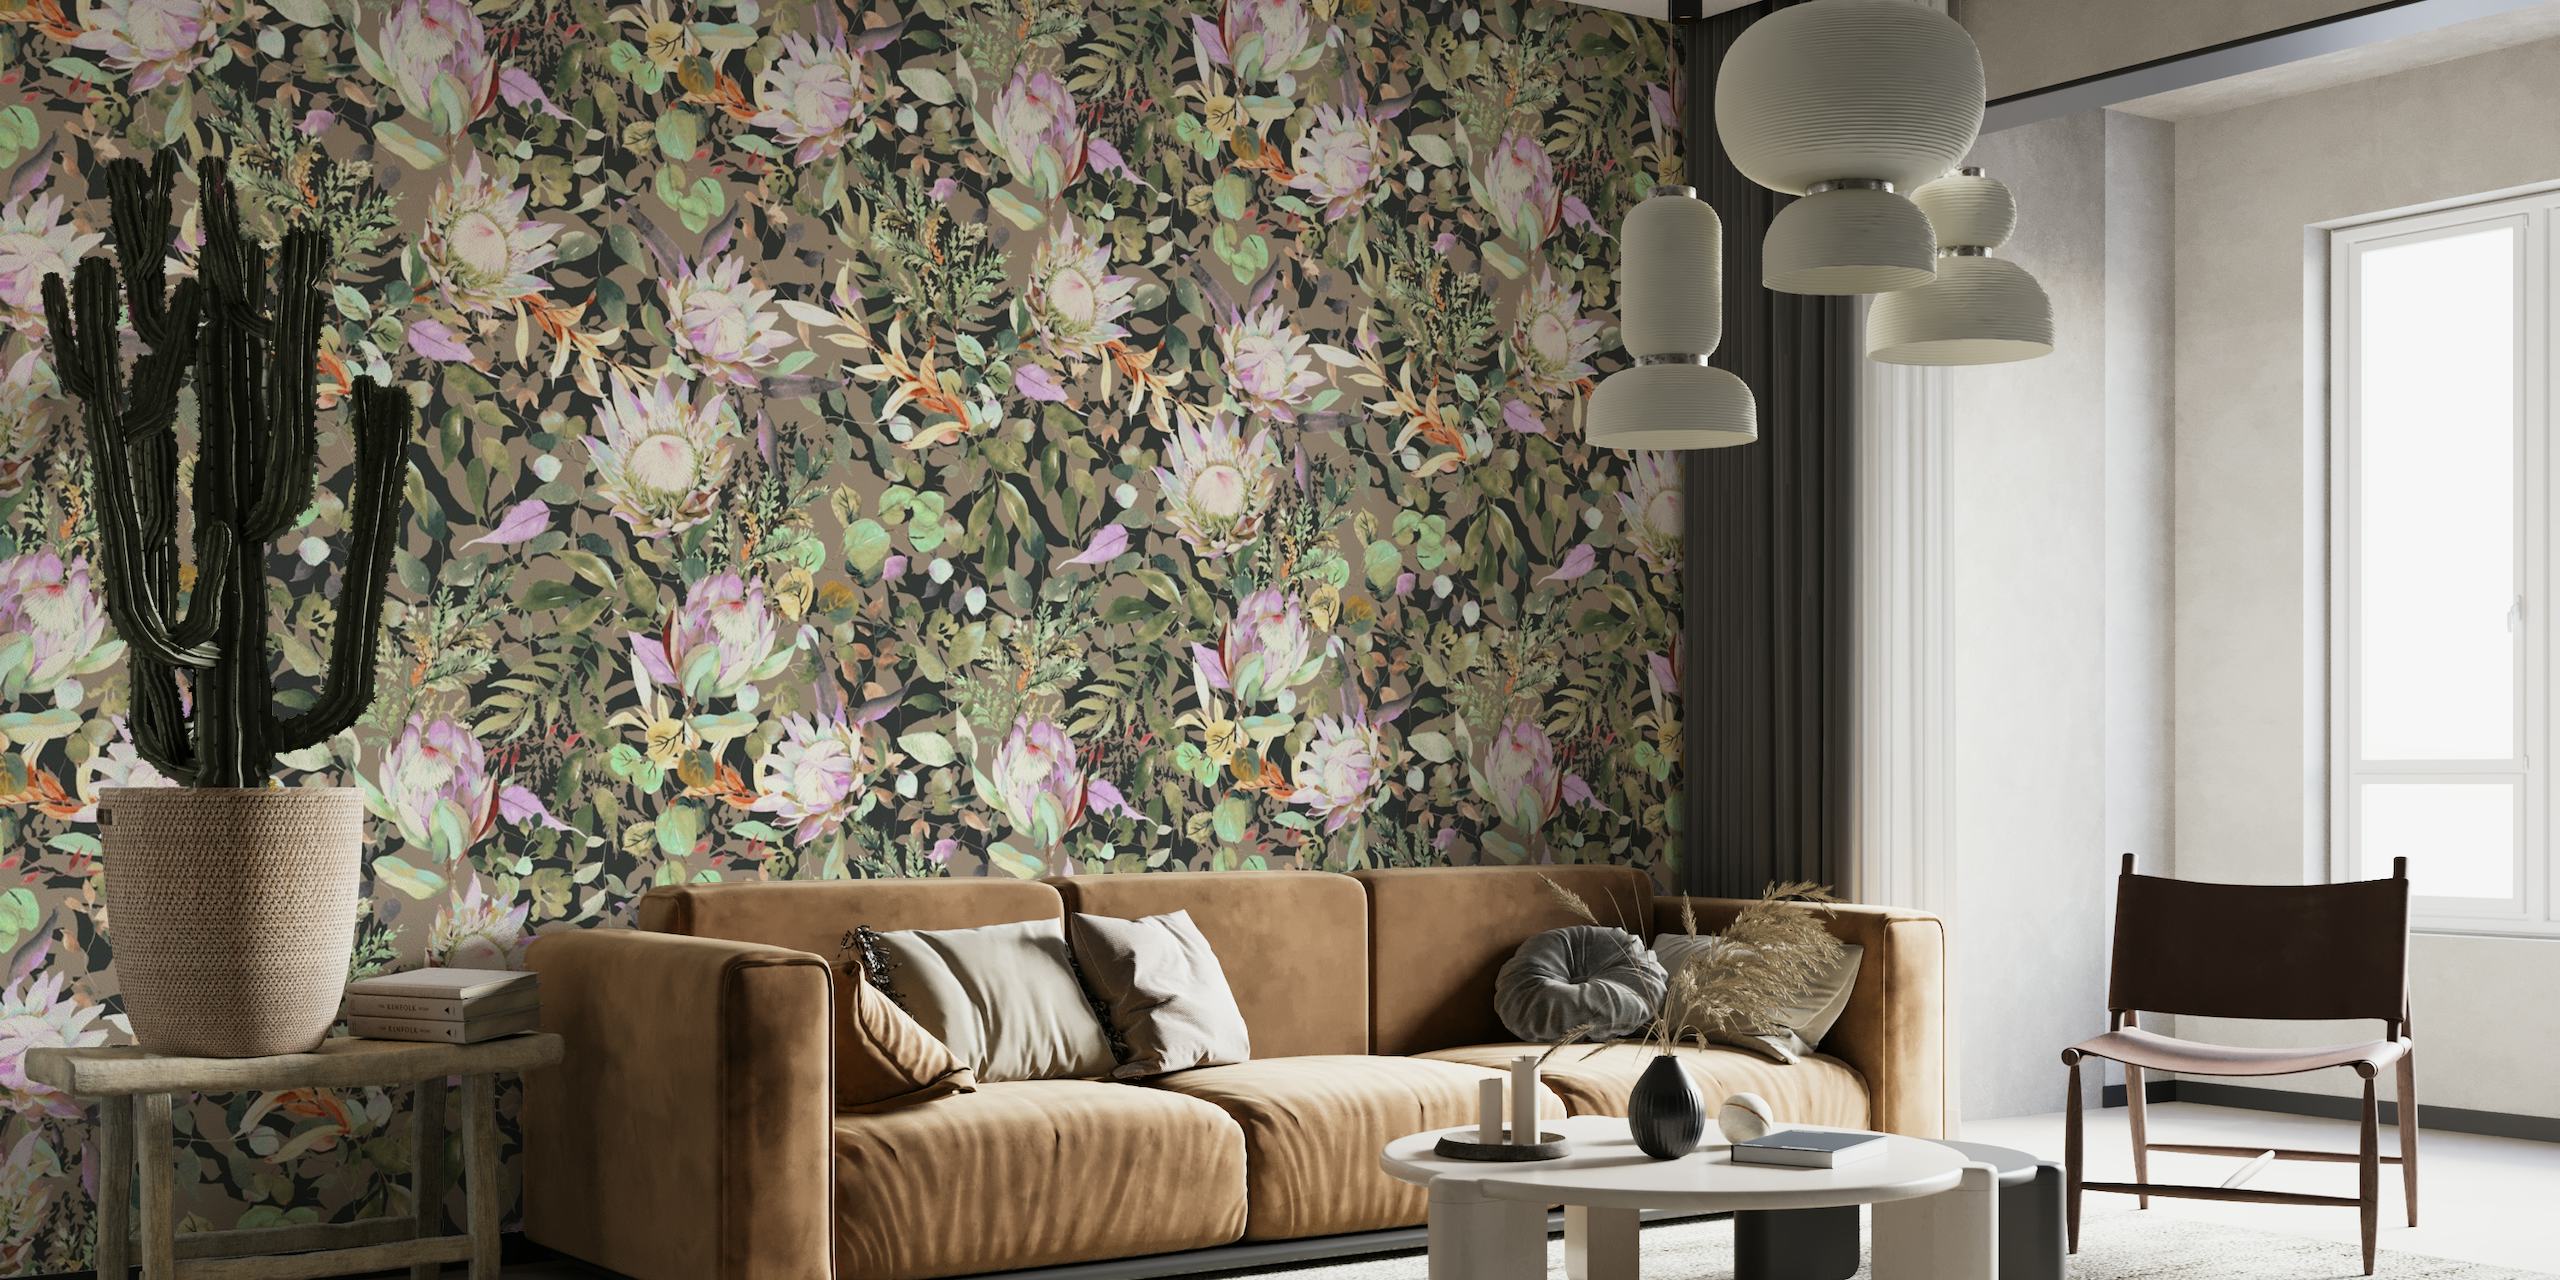 Bohemian style protea floral pattern wall mural